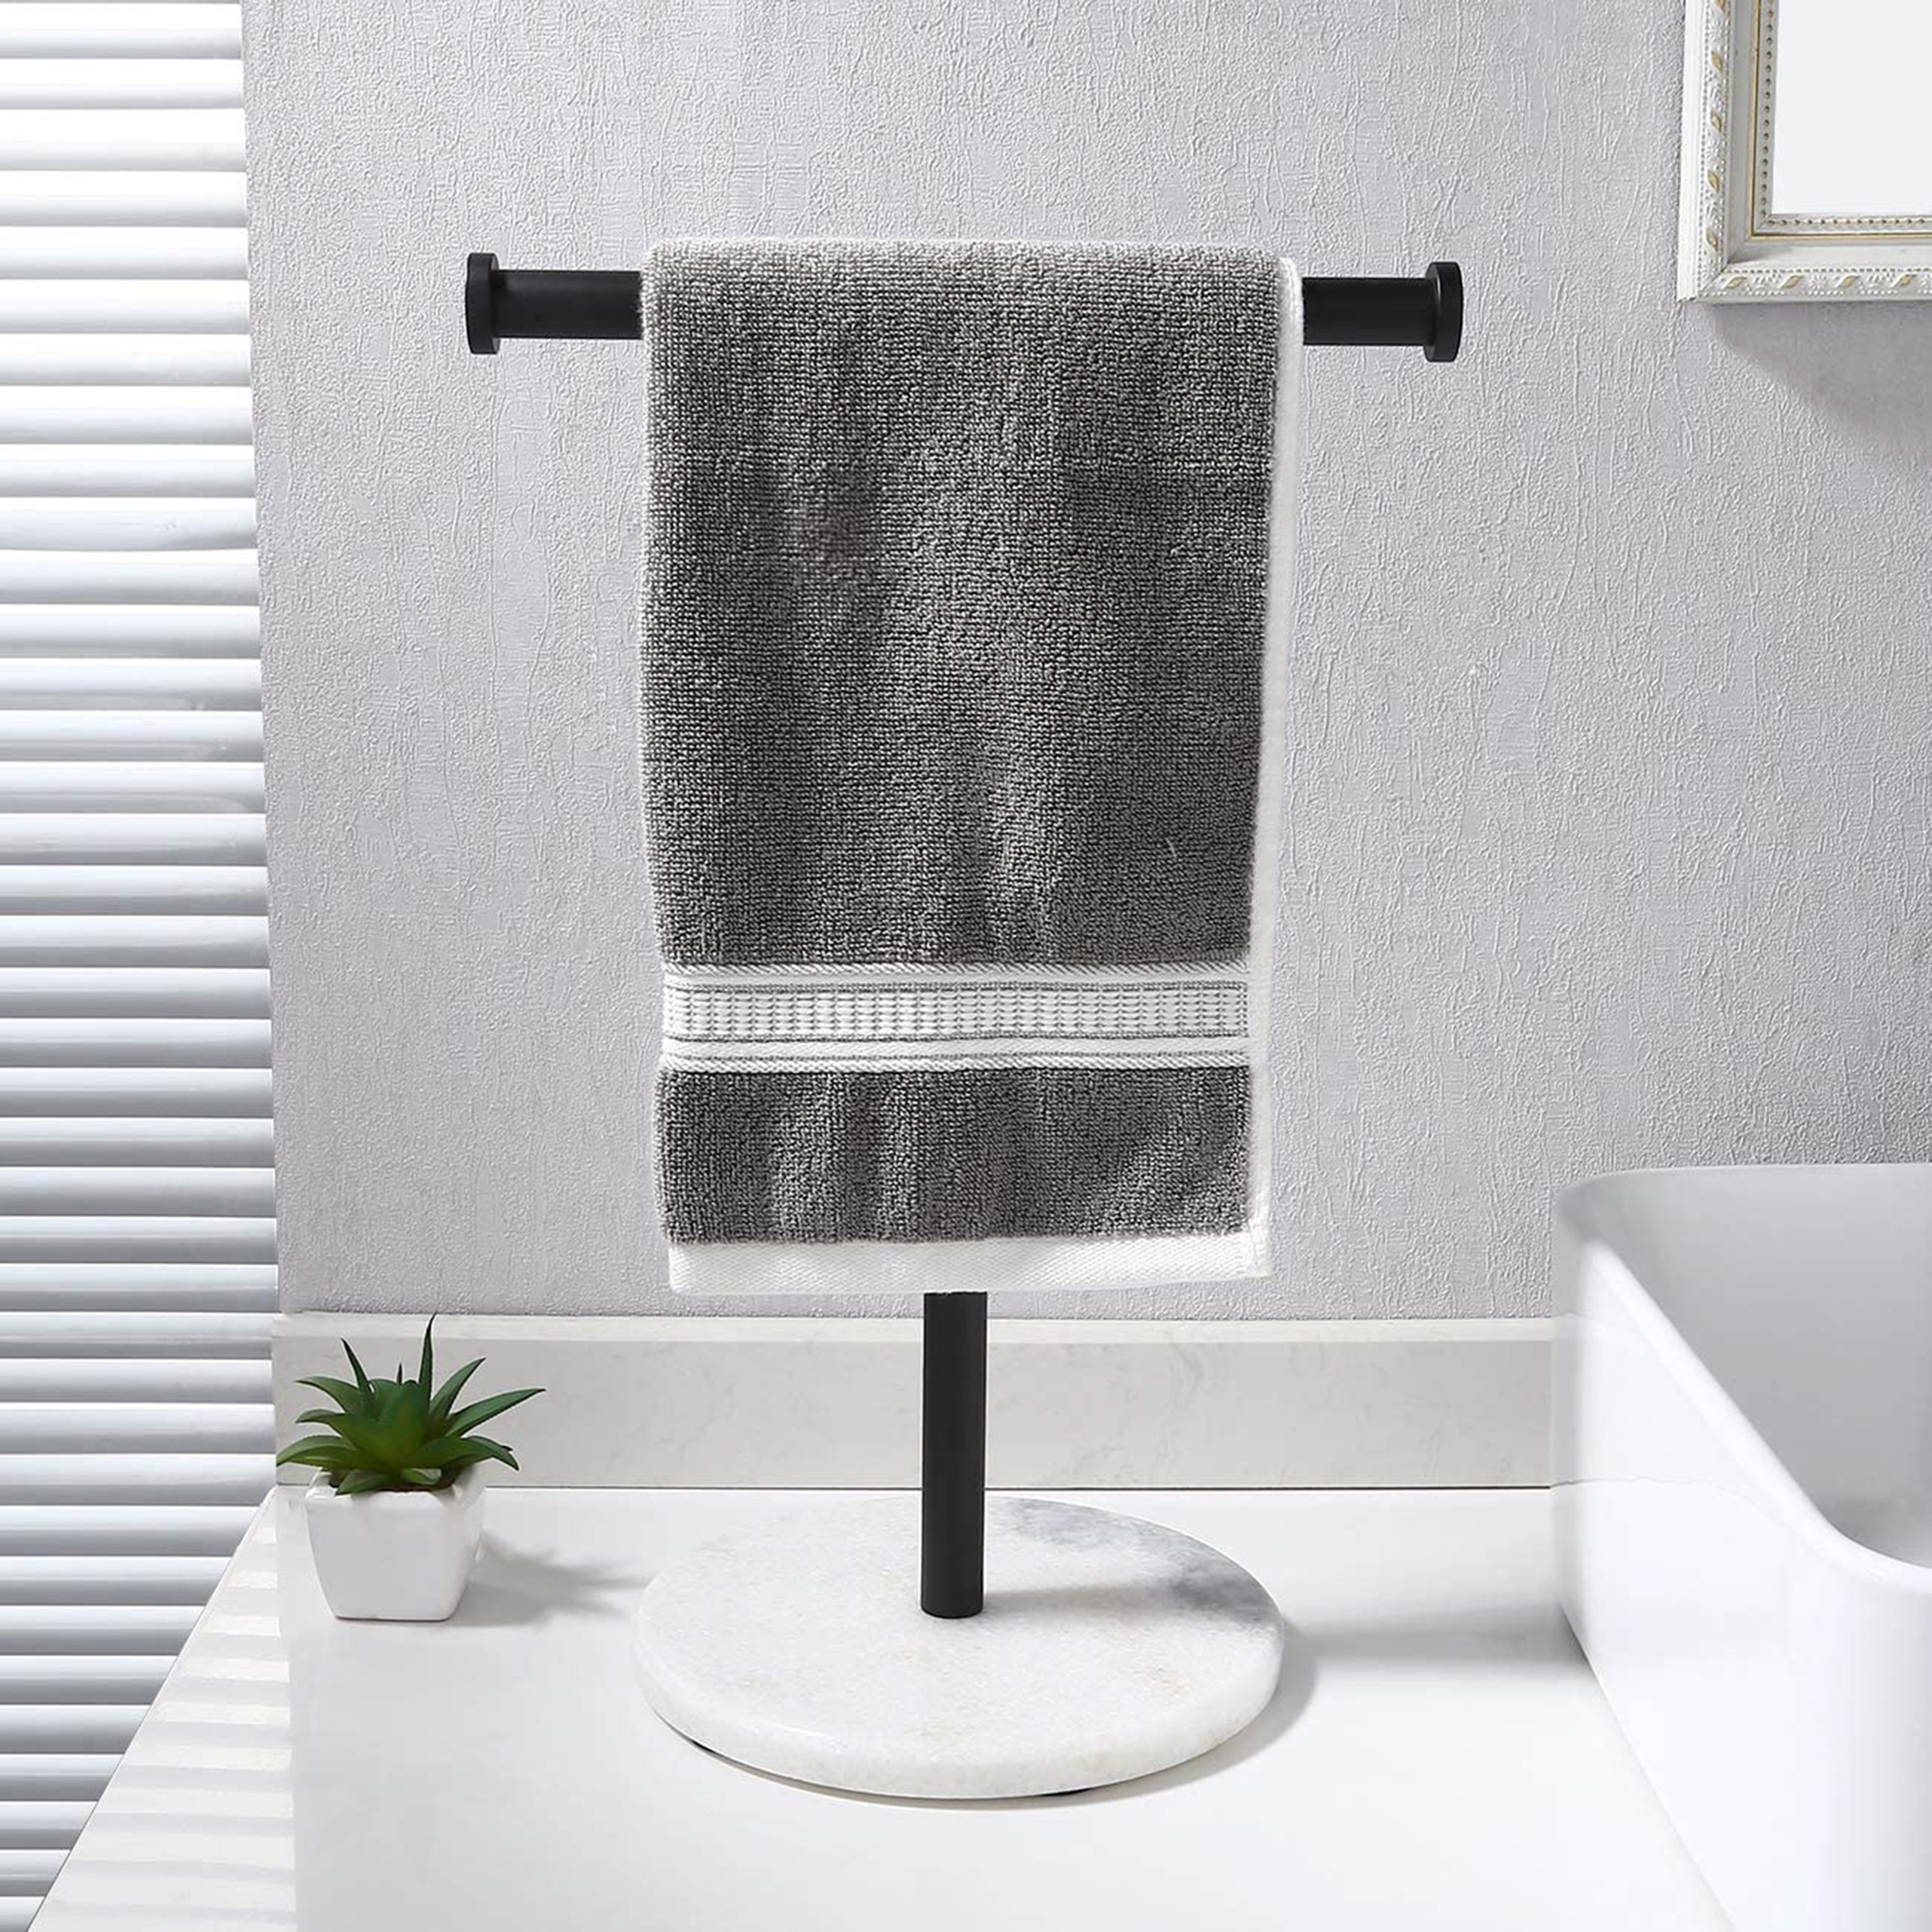 https://ak1.ostkcdn.com/images/products/is/images/direct/875524614938899da8cbcda5b6bb4bd92e2a16ab/Countertop-T-Shape-Towel-Rack-Holer-with-Heavy-Weight-Marble-Base.jpg